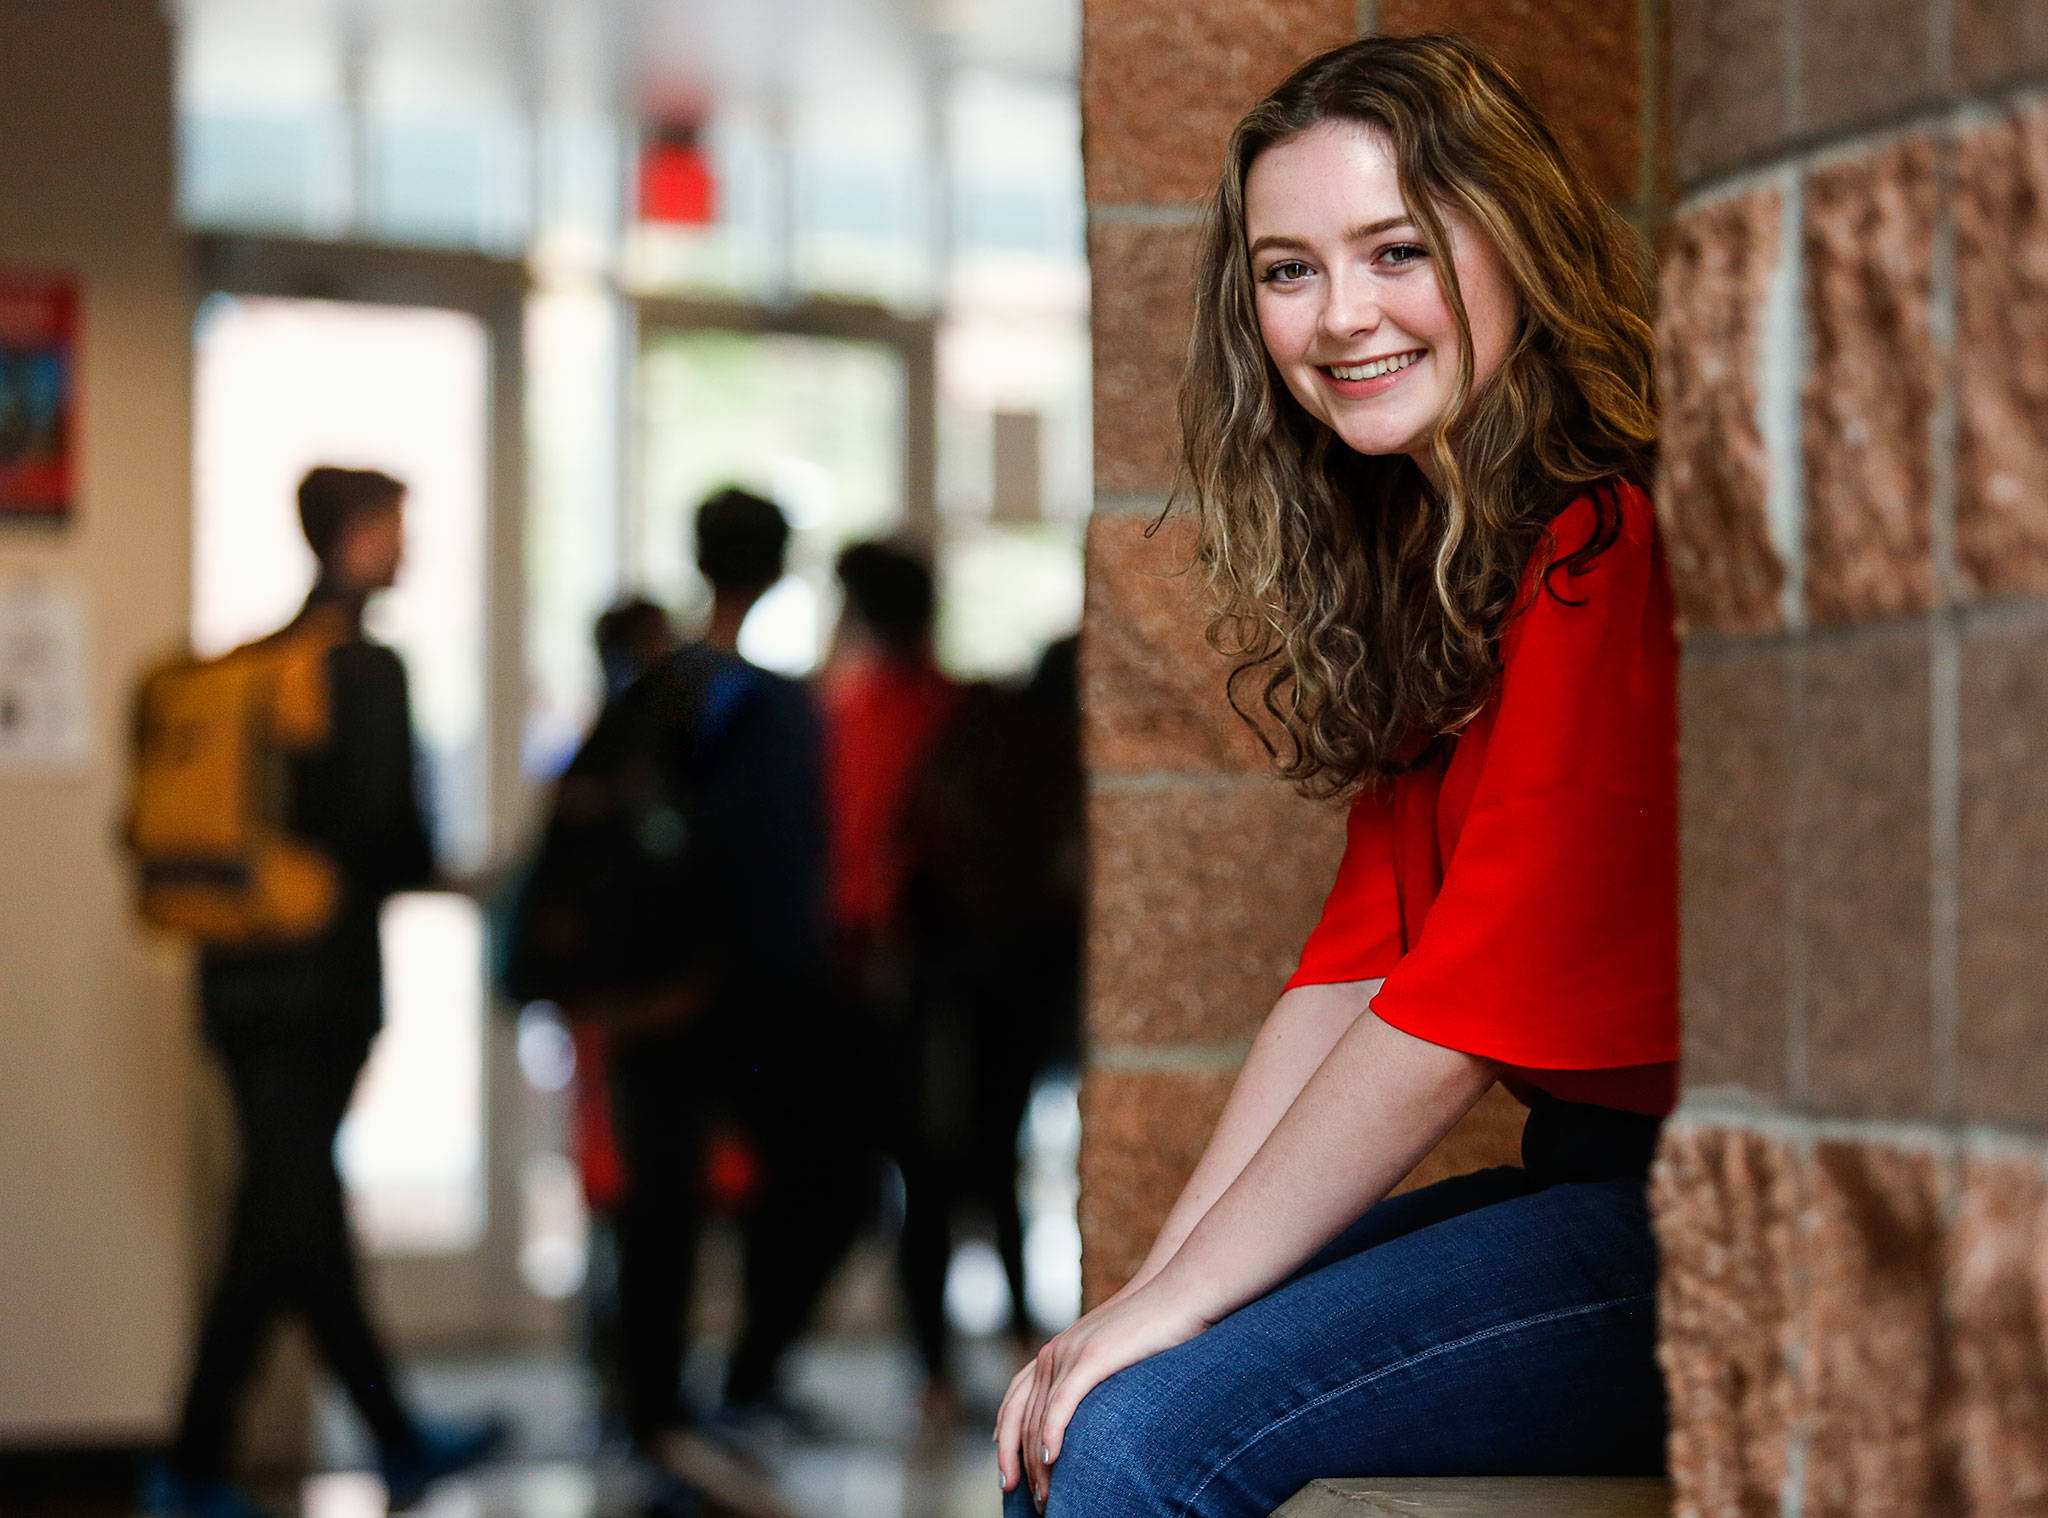 Kamiak High School senior Paige Cox says her interest in acting started in fifth grade when she played the lead role in a Missoula Children’s Theatre production of “Snow White and the Seven Dwarfs.” “I did end up playing Snow White, and that was really special for me. I think that’s definitely what kick-started it.” (Dan Bates / The Herald)